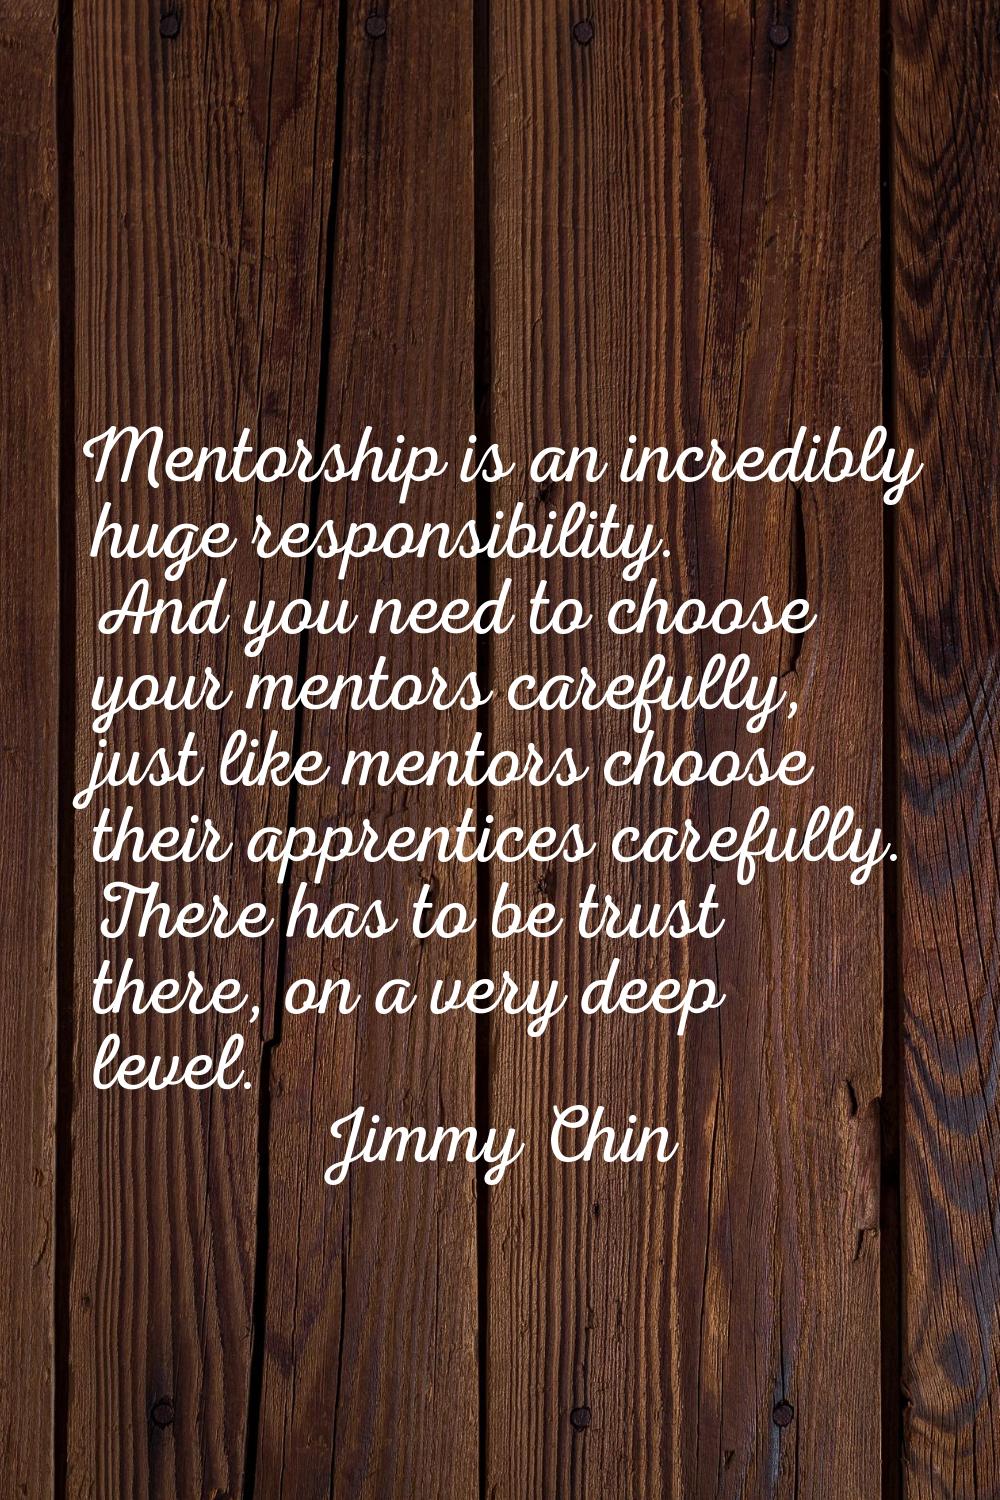 Mentorship is an incredibly huge responsibility. And you need to choose your mentors carefully, jus